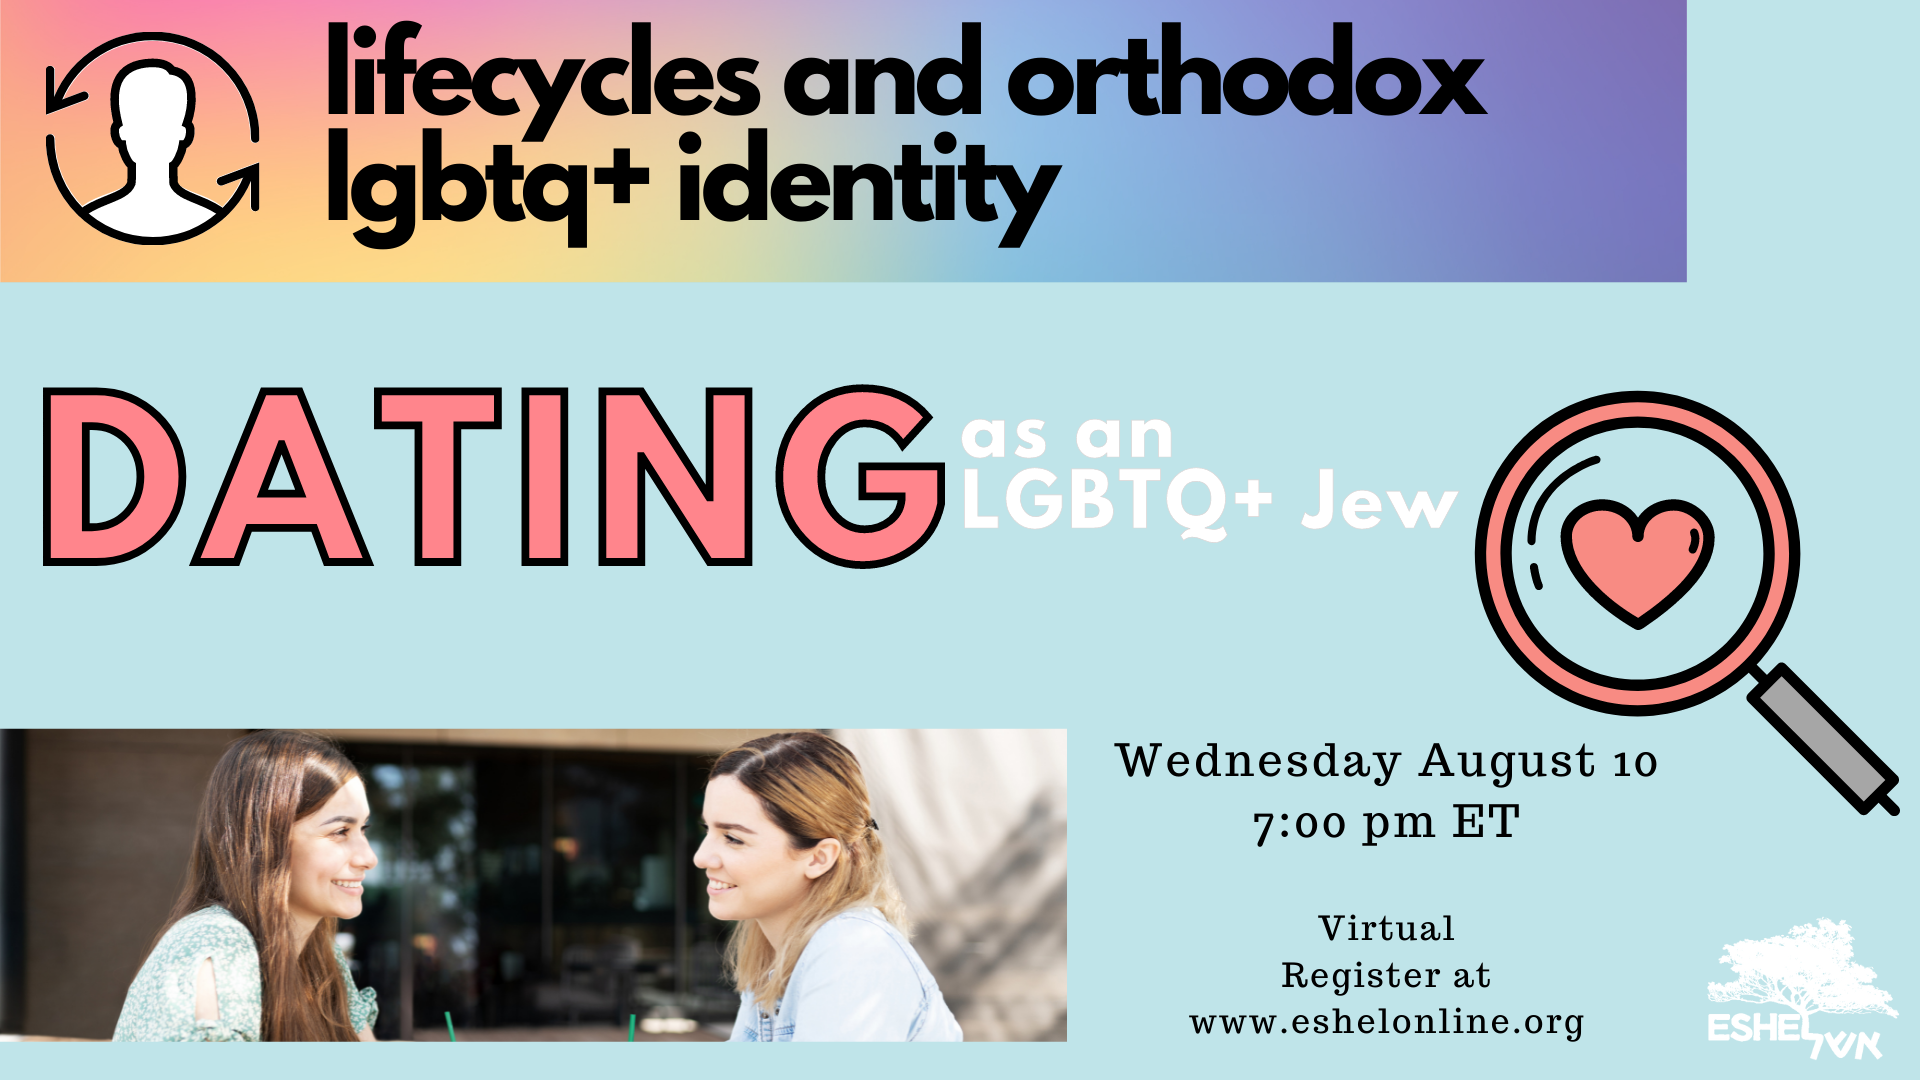 Lifecycles and Orthodox LGBTQ+ Identity | Dating as an LGBTQ+ Jew | Wednesday, August 10, 7:00 pm ET, Virtual register at www.eshelonline.org